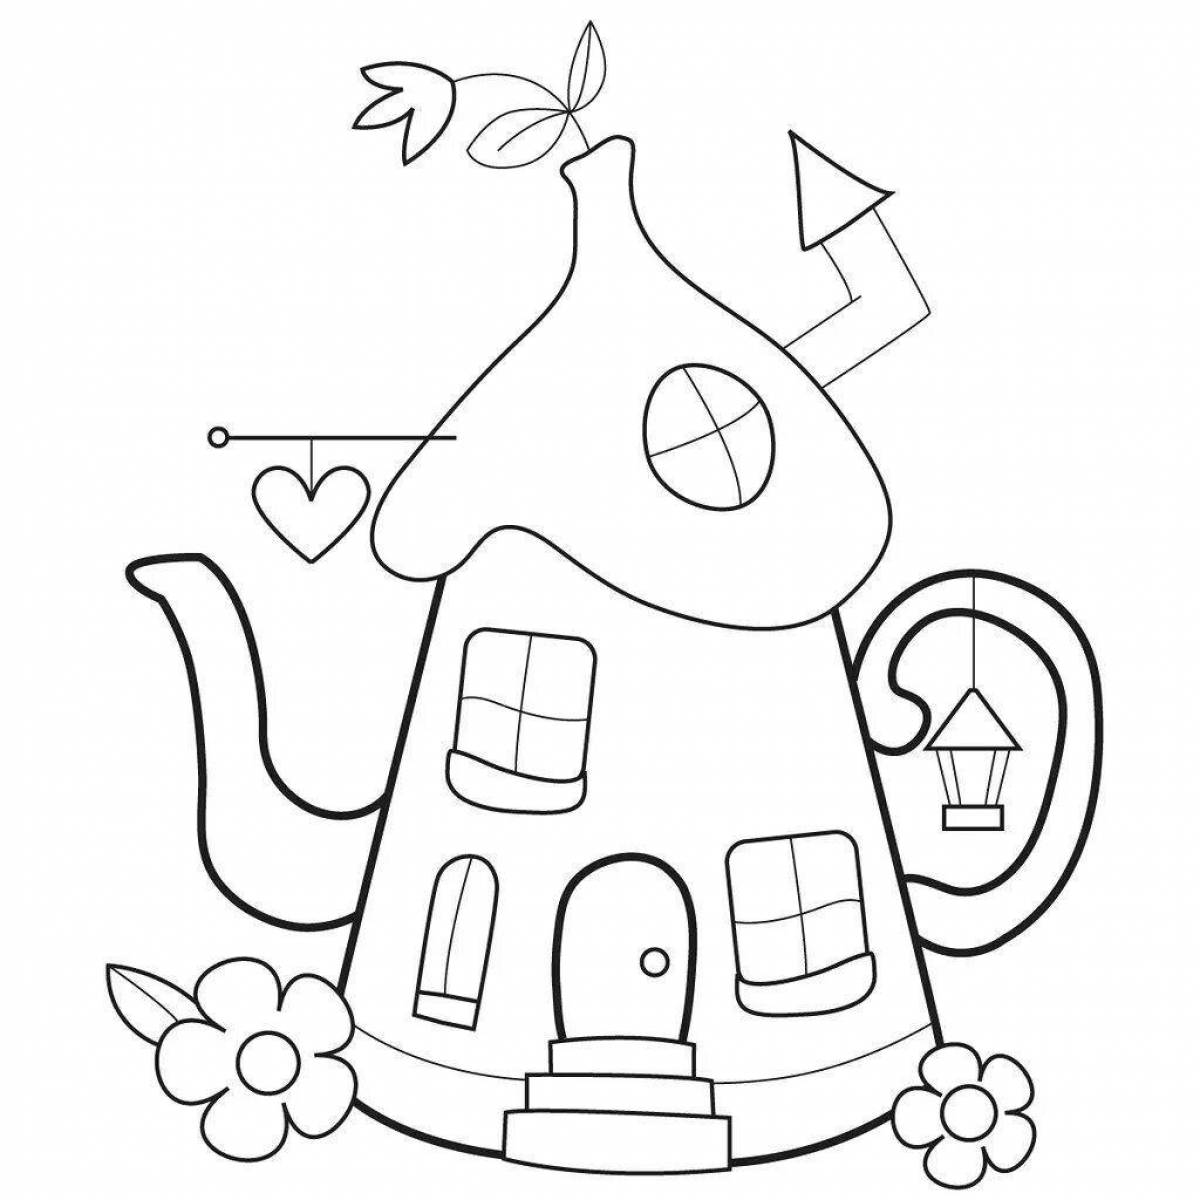 Fairy house glitter coloring book